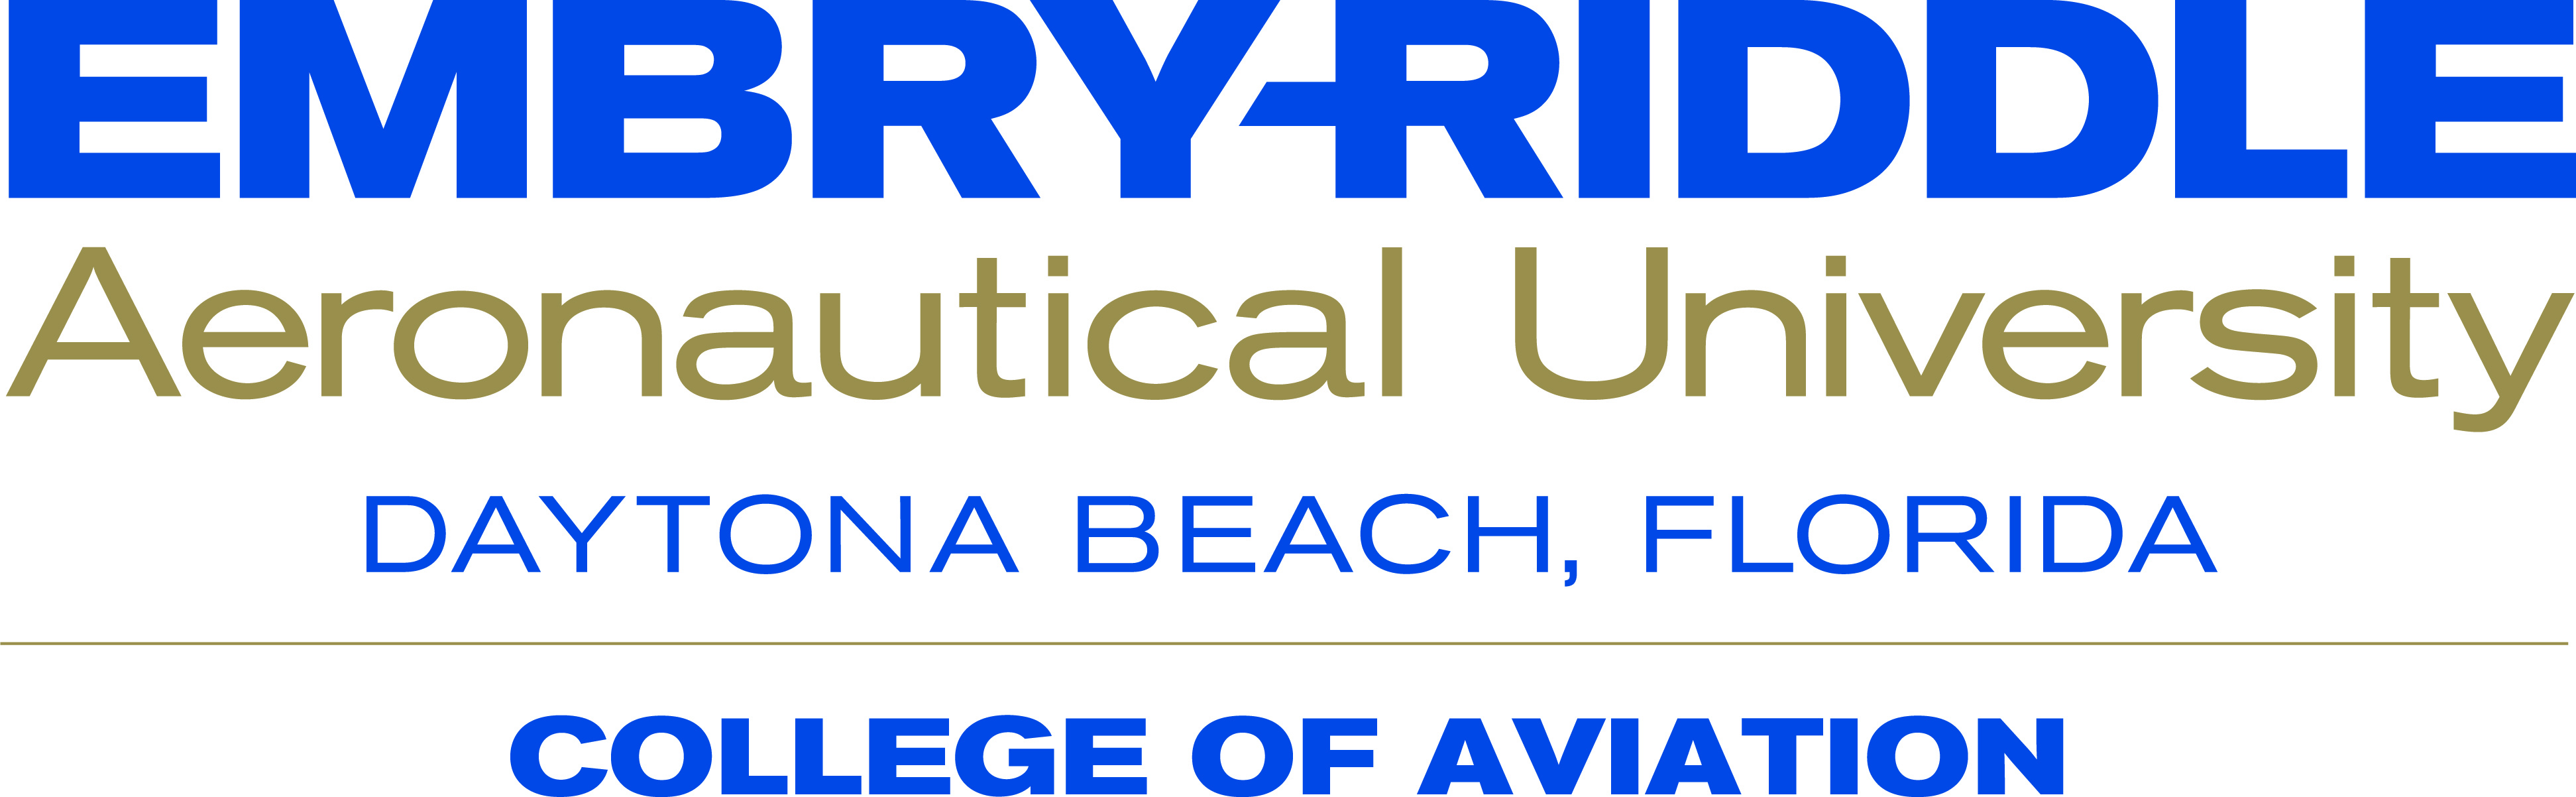 Embry-Riddle College of Aviation